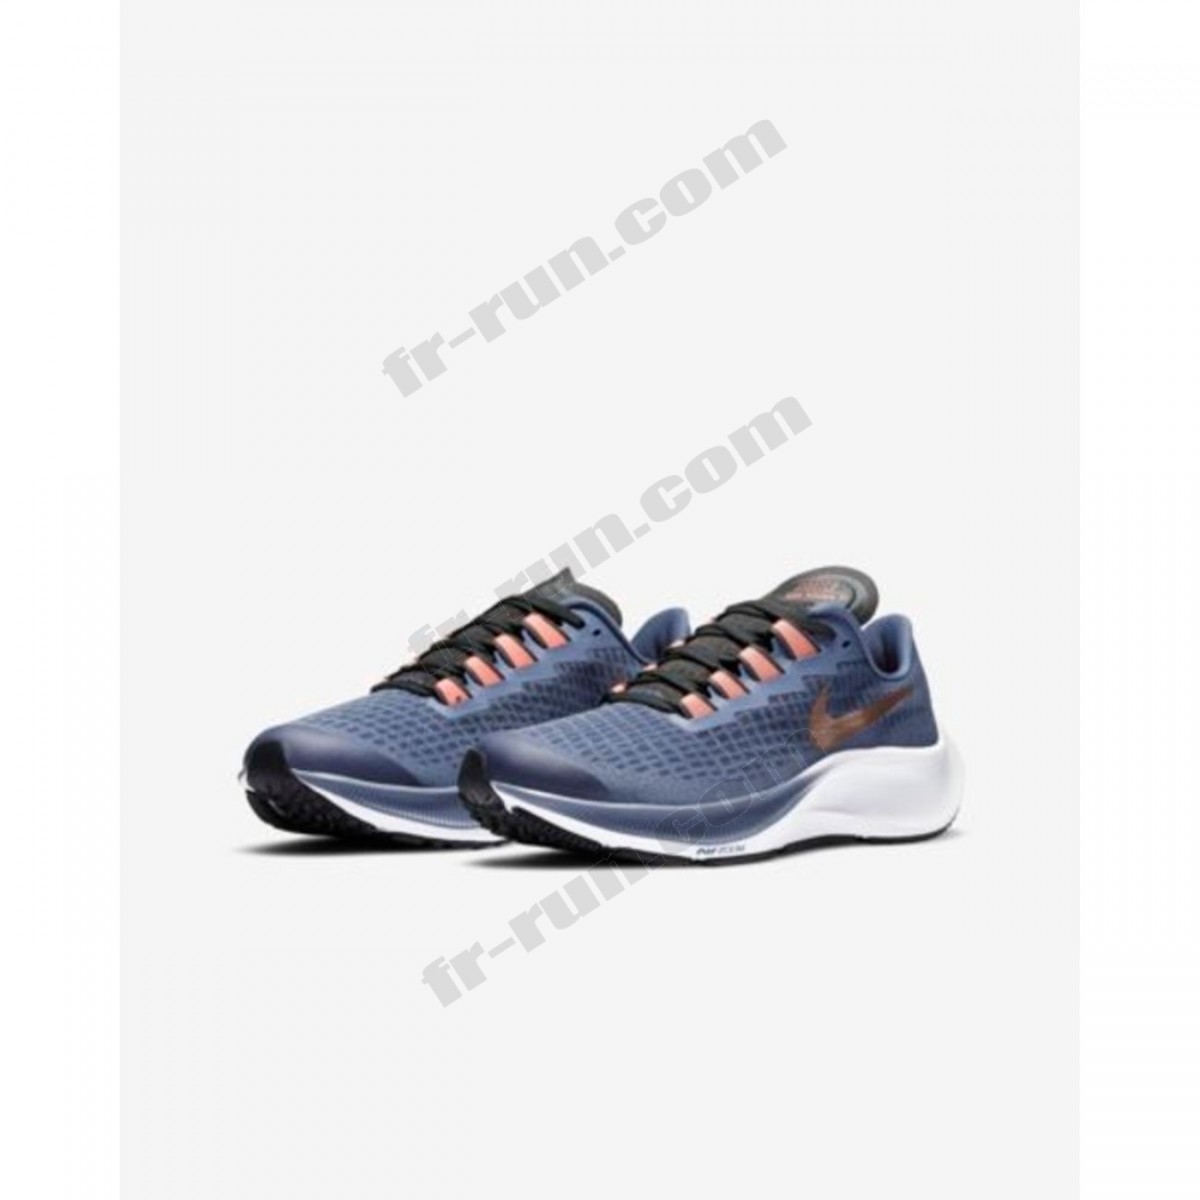 Nike/CHAUSSURES running NIKE AIR ZOOM PEGASUS 37 √ Nouveau style √ Soldes - -3